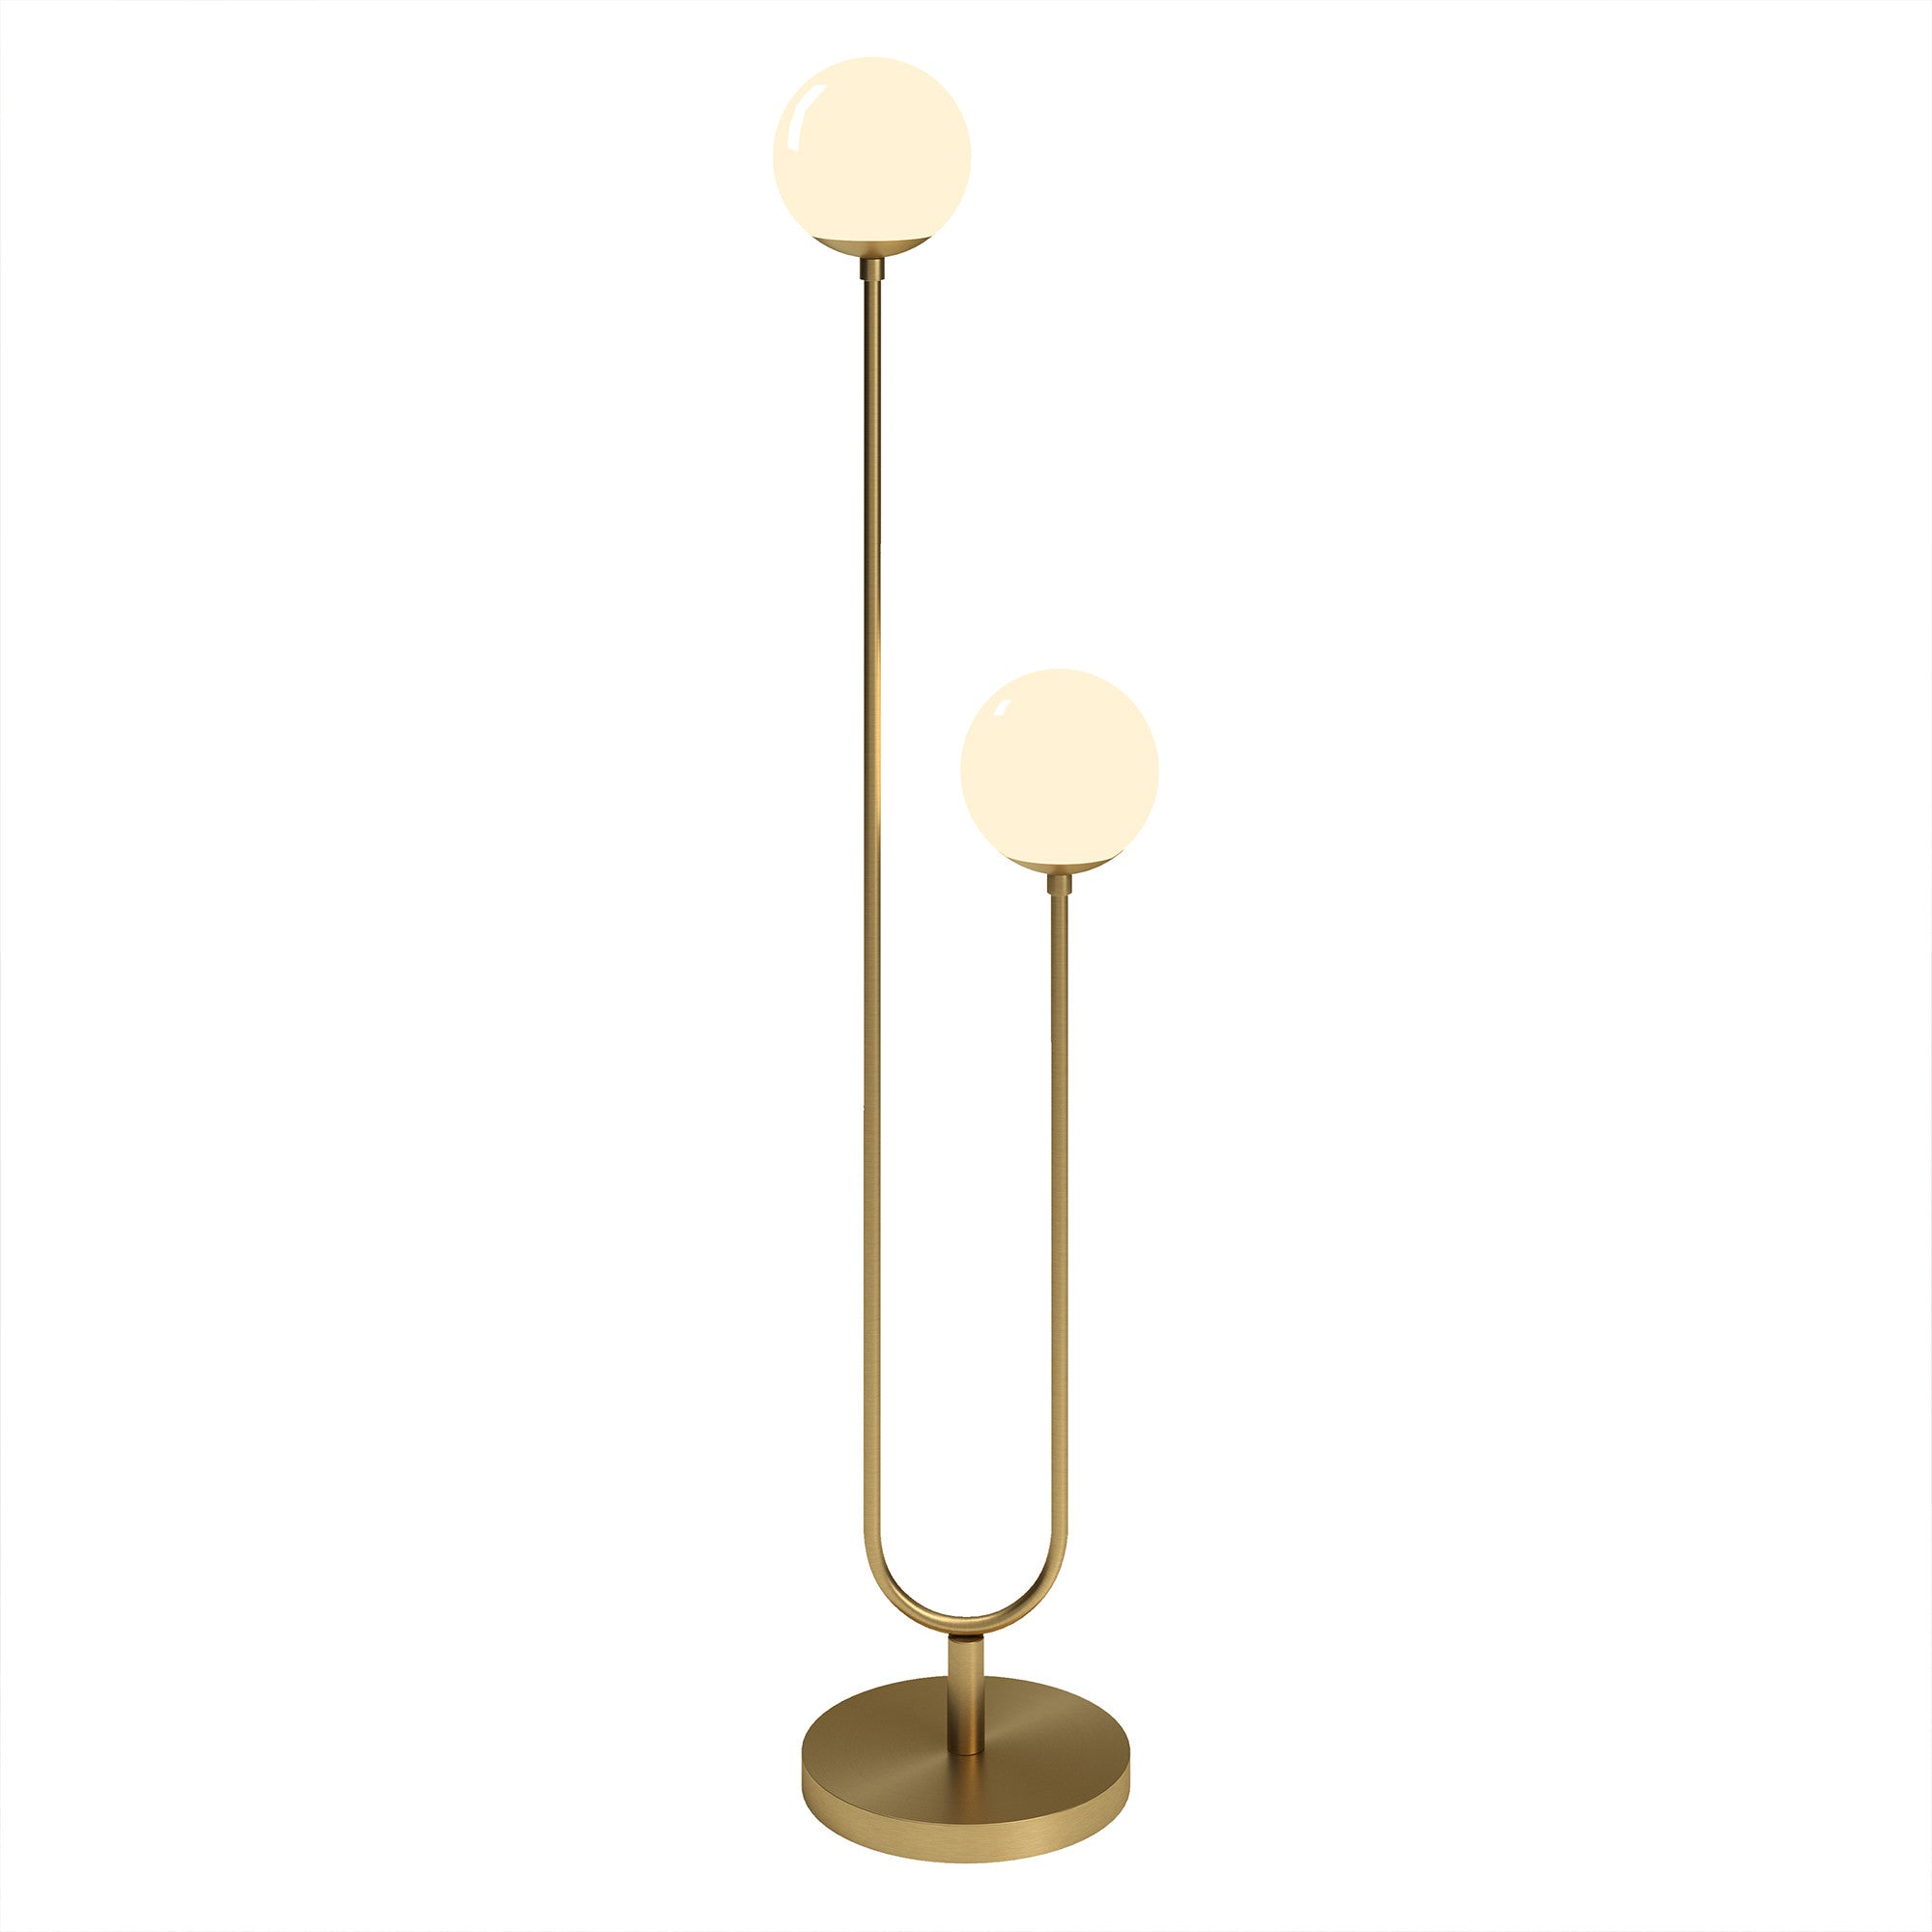 69" Brass Two Light Novelty Floor Lamp With White Frosted Glass Globe Shade